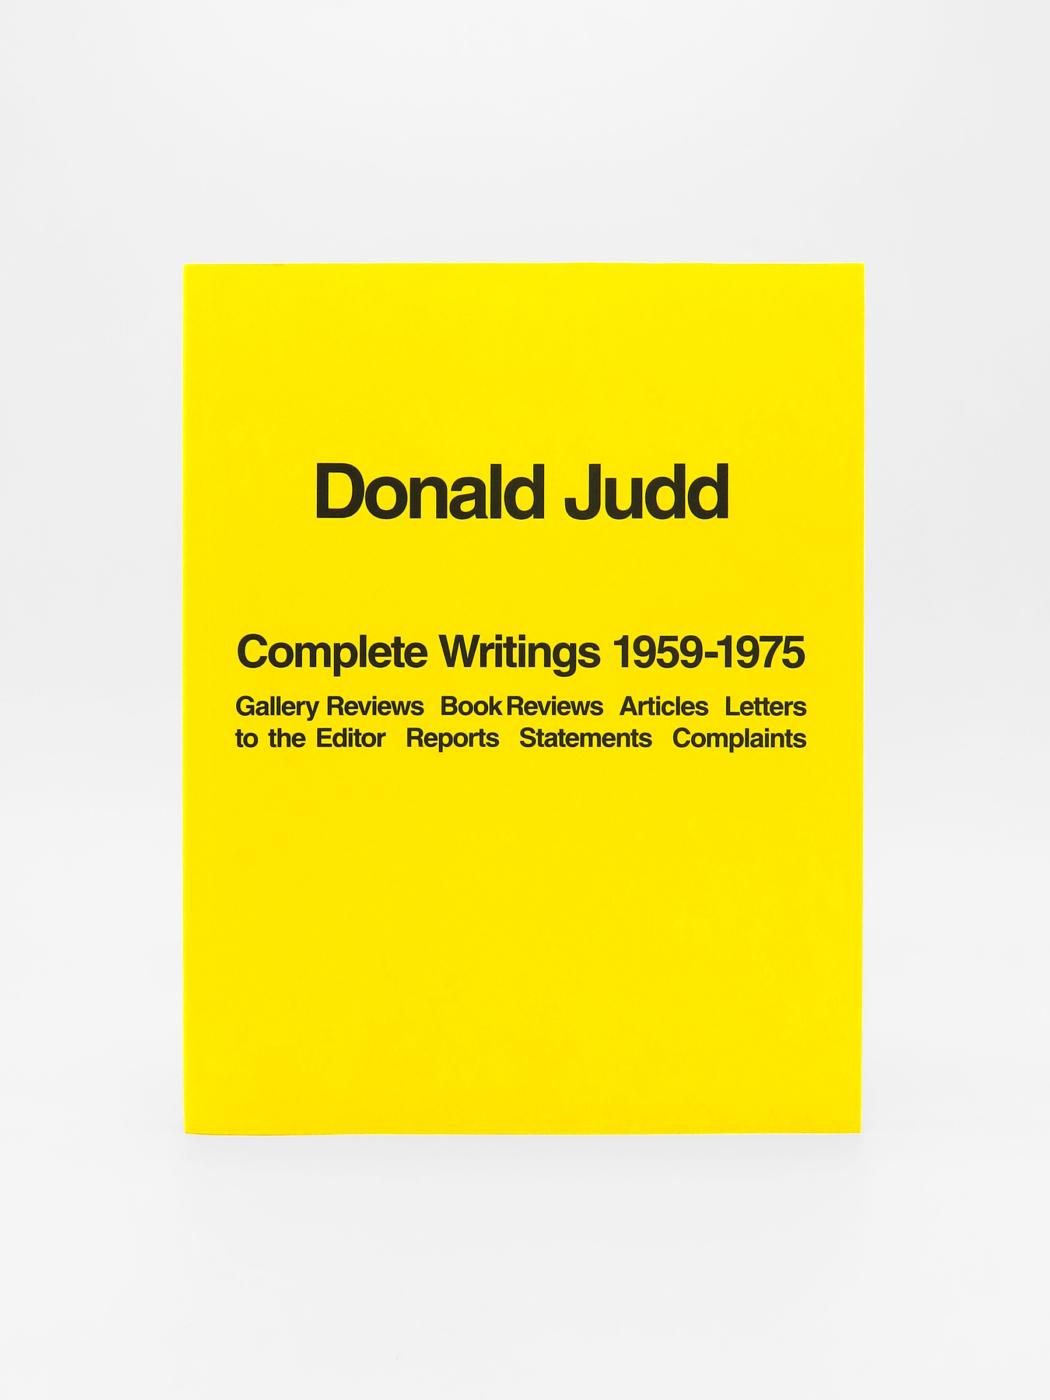 Donald Judd, Complete Writings 1959-1975